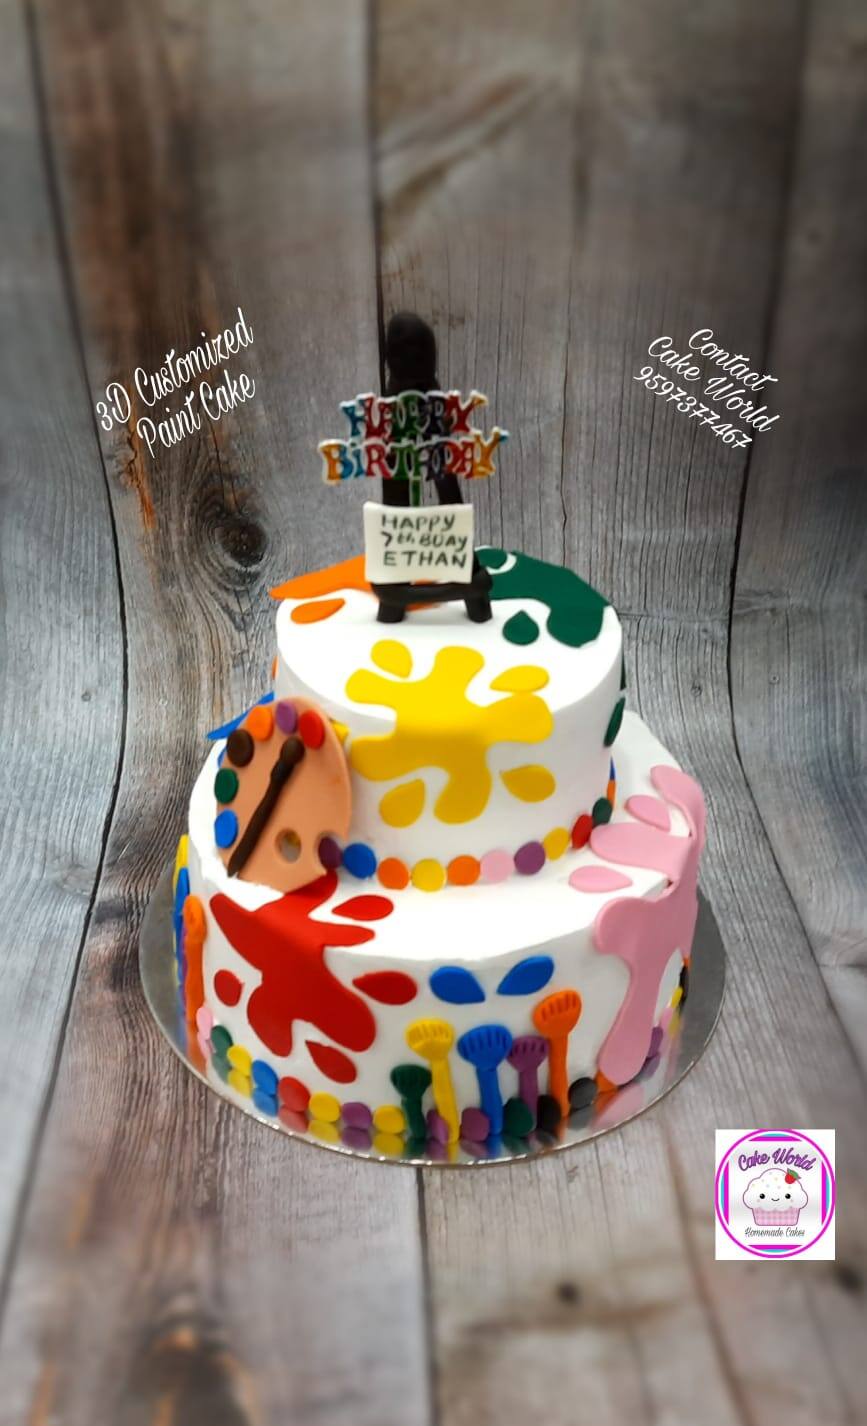 GET THE BEST OF CAKES WITH #MRS BAH's CAKE WORLD | THE OBSERVER!